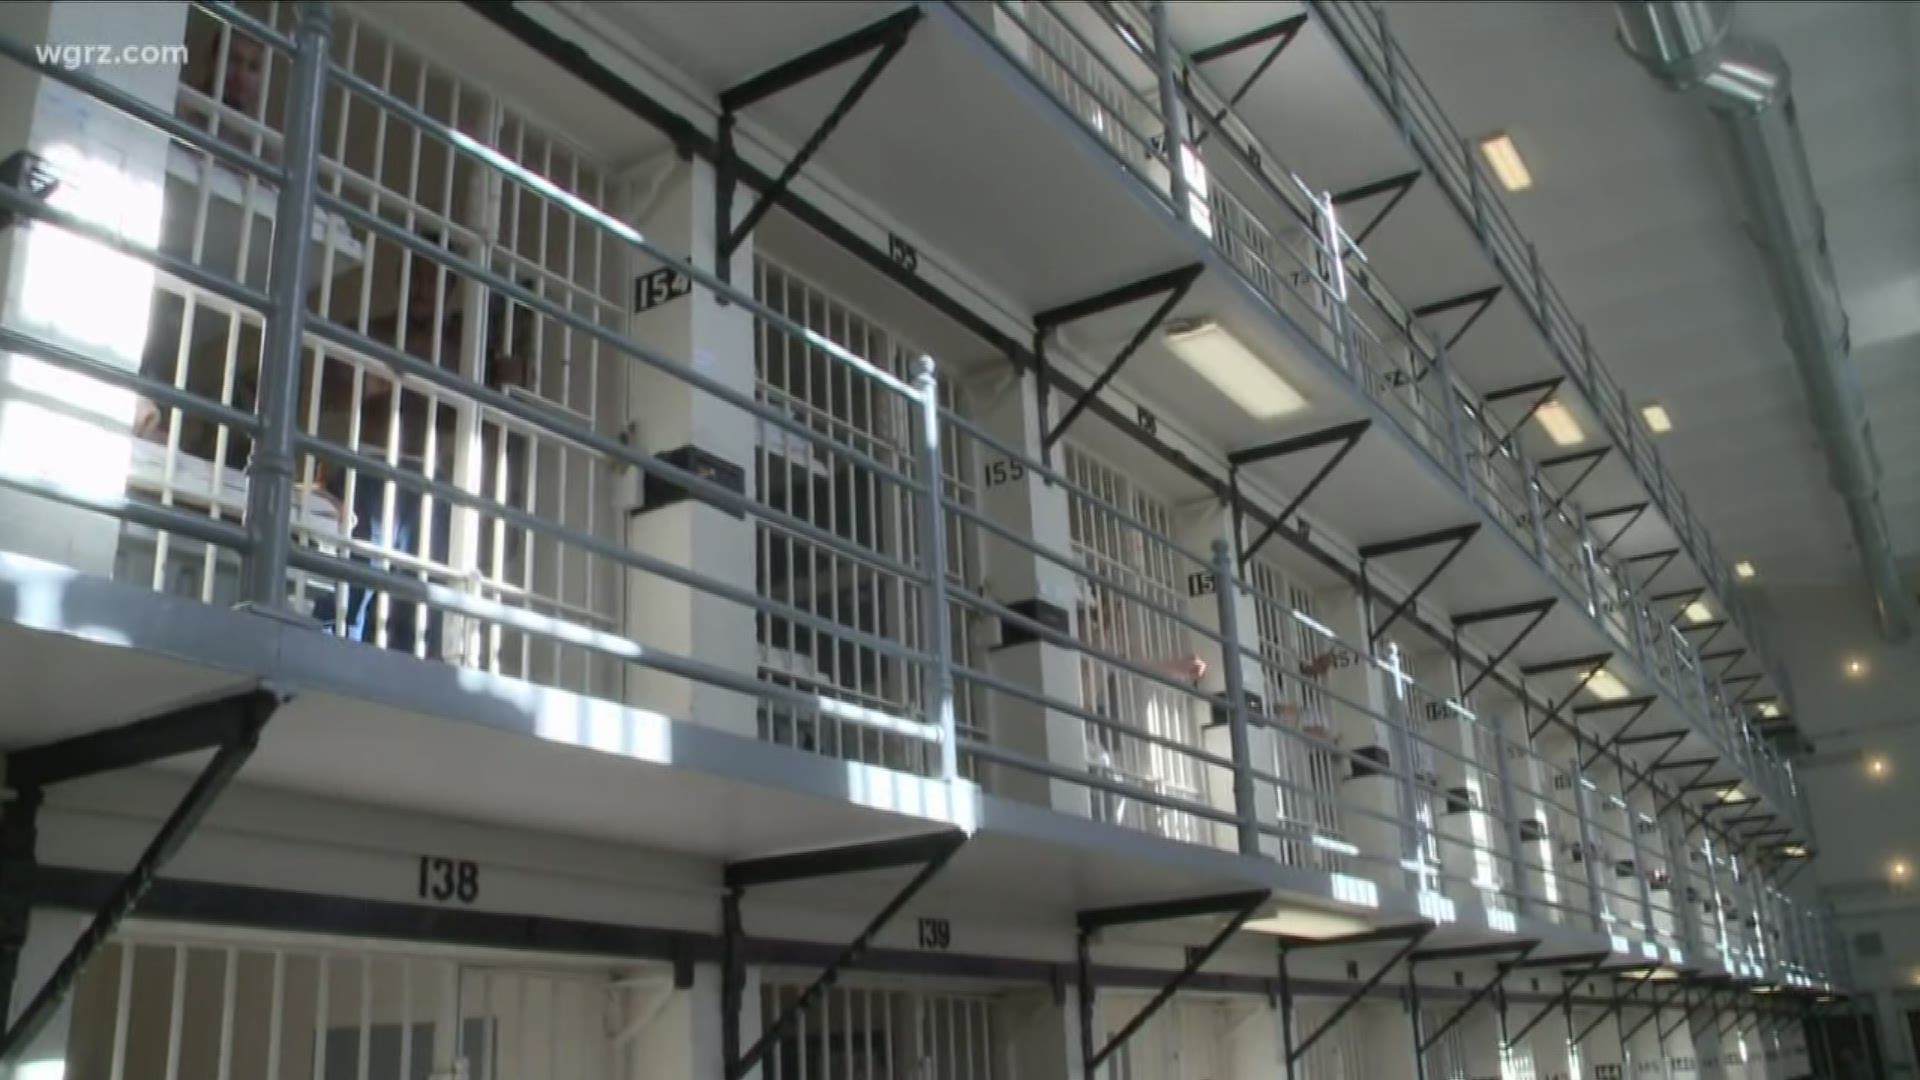 corrections officers union claims it's dangerous to force criminals into fewer prisons.